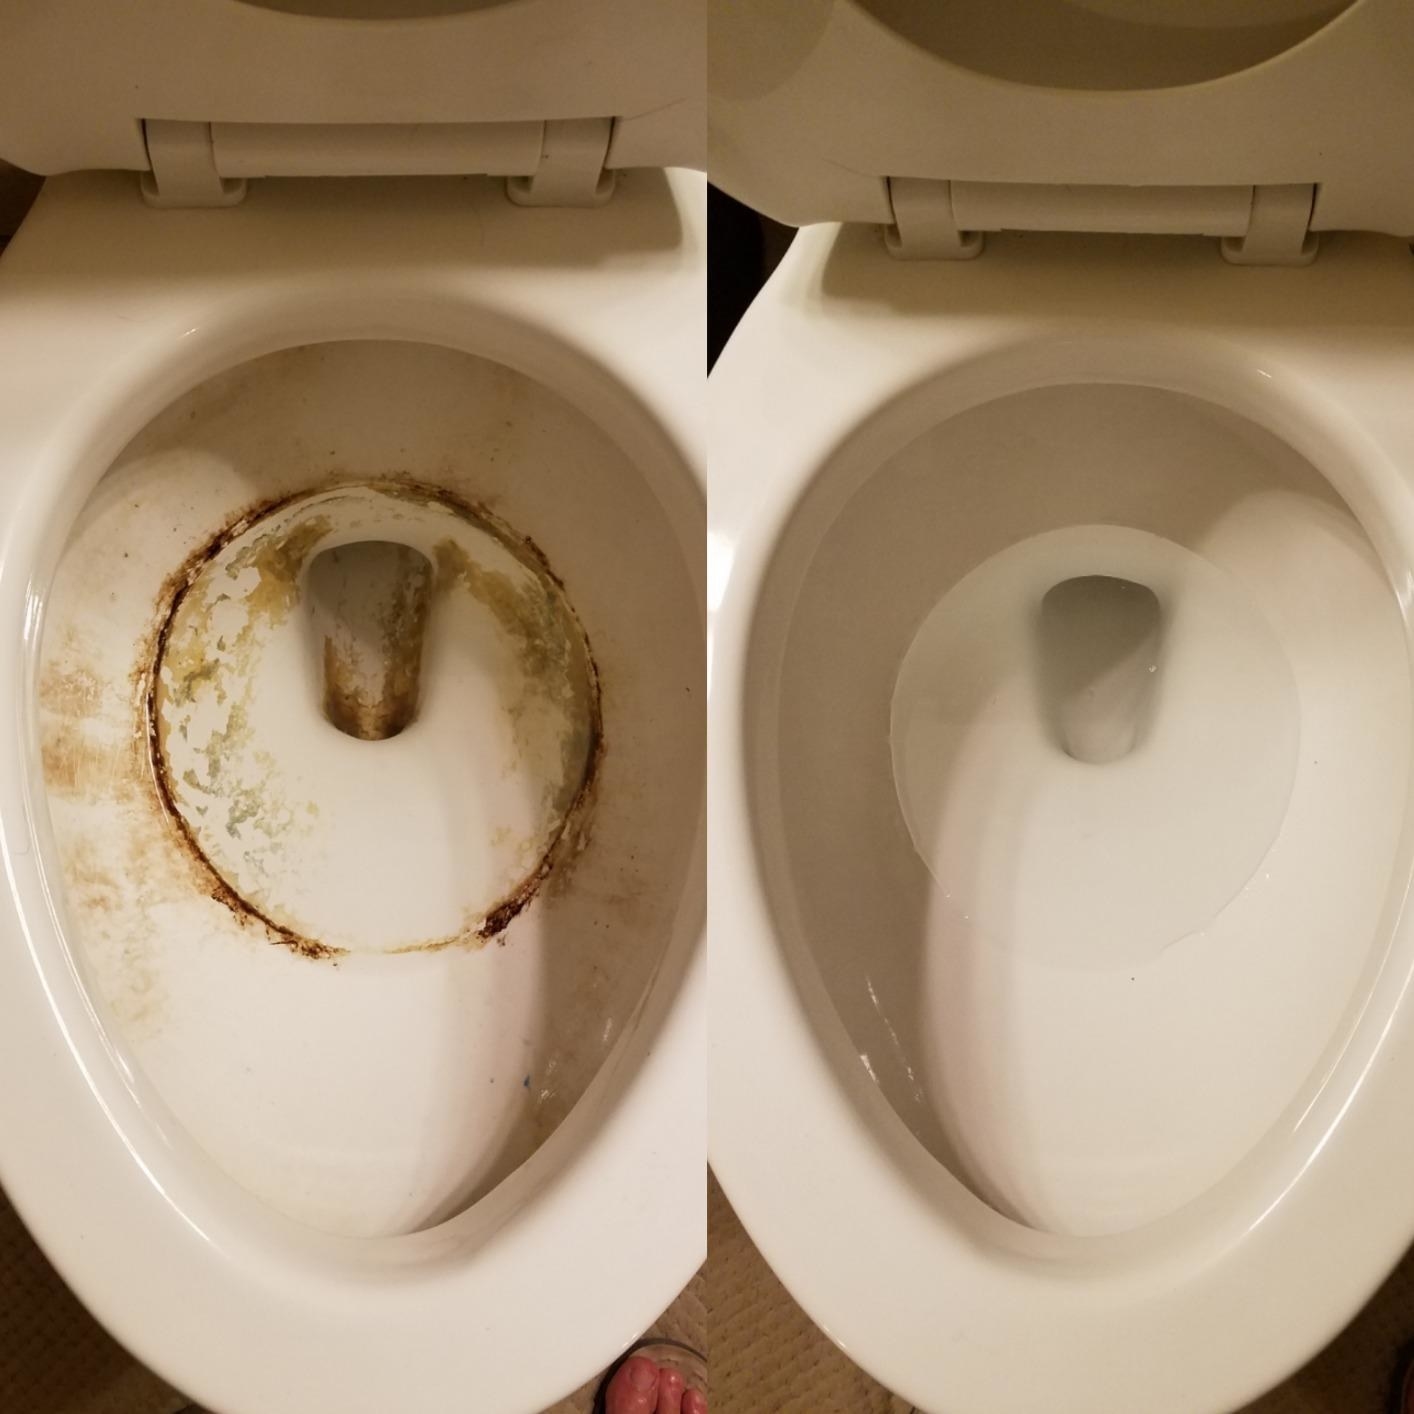 28 Things That Actually Make Cleaning Toilets Incredibly Easy